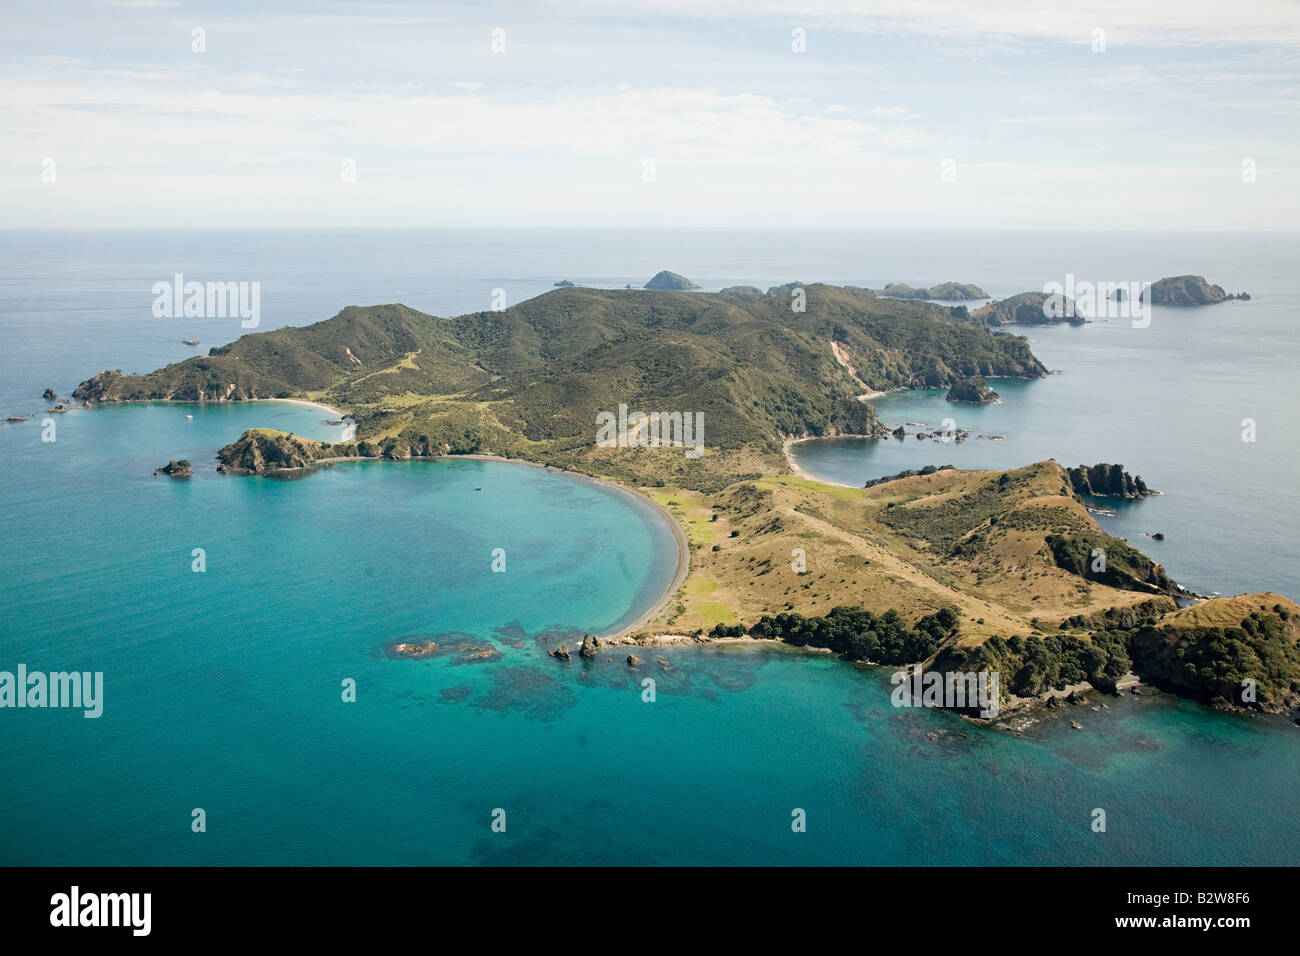 Aerial view of bay of islands Stock Photo